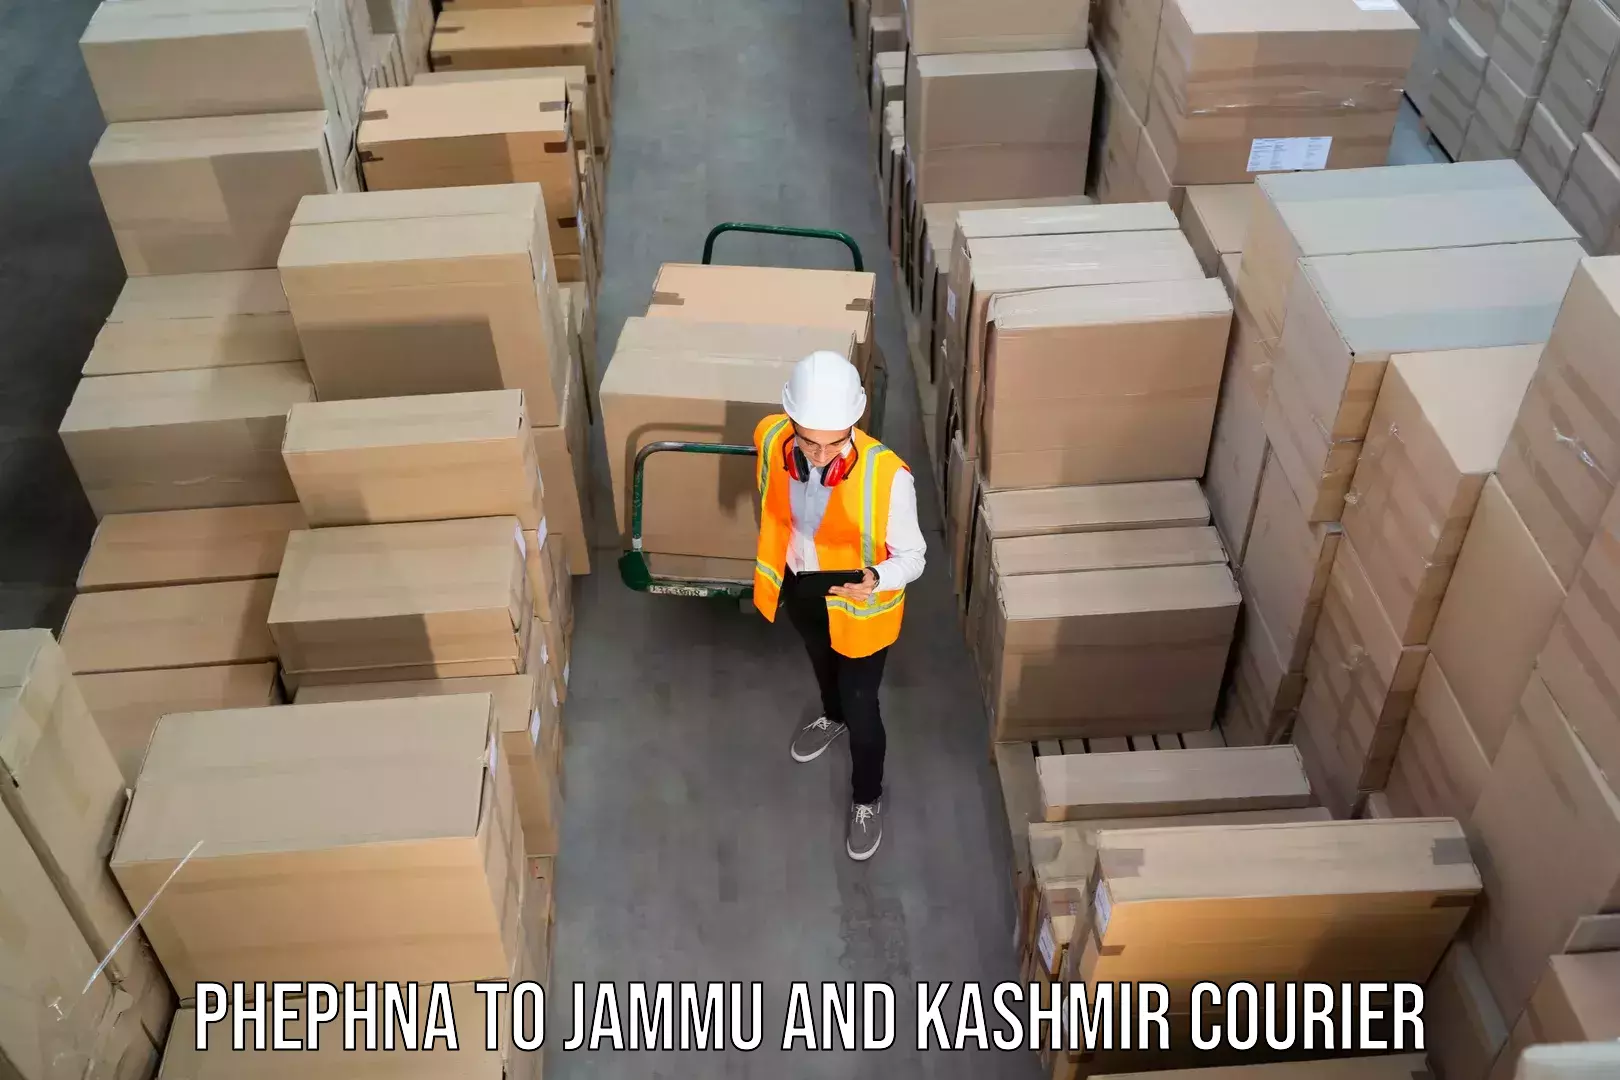 24-hour delivery options Phephna to Jammu and Kashmir